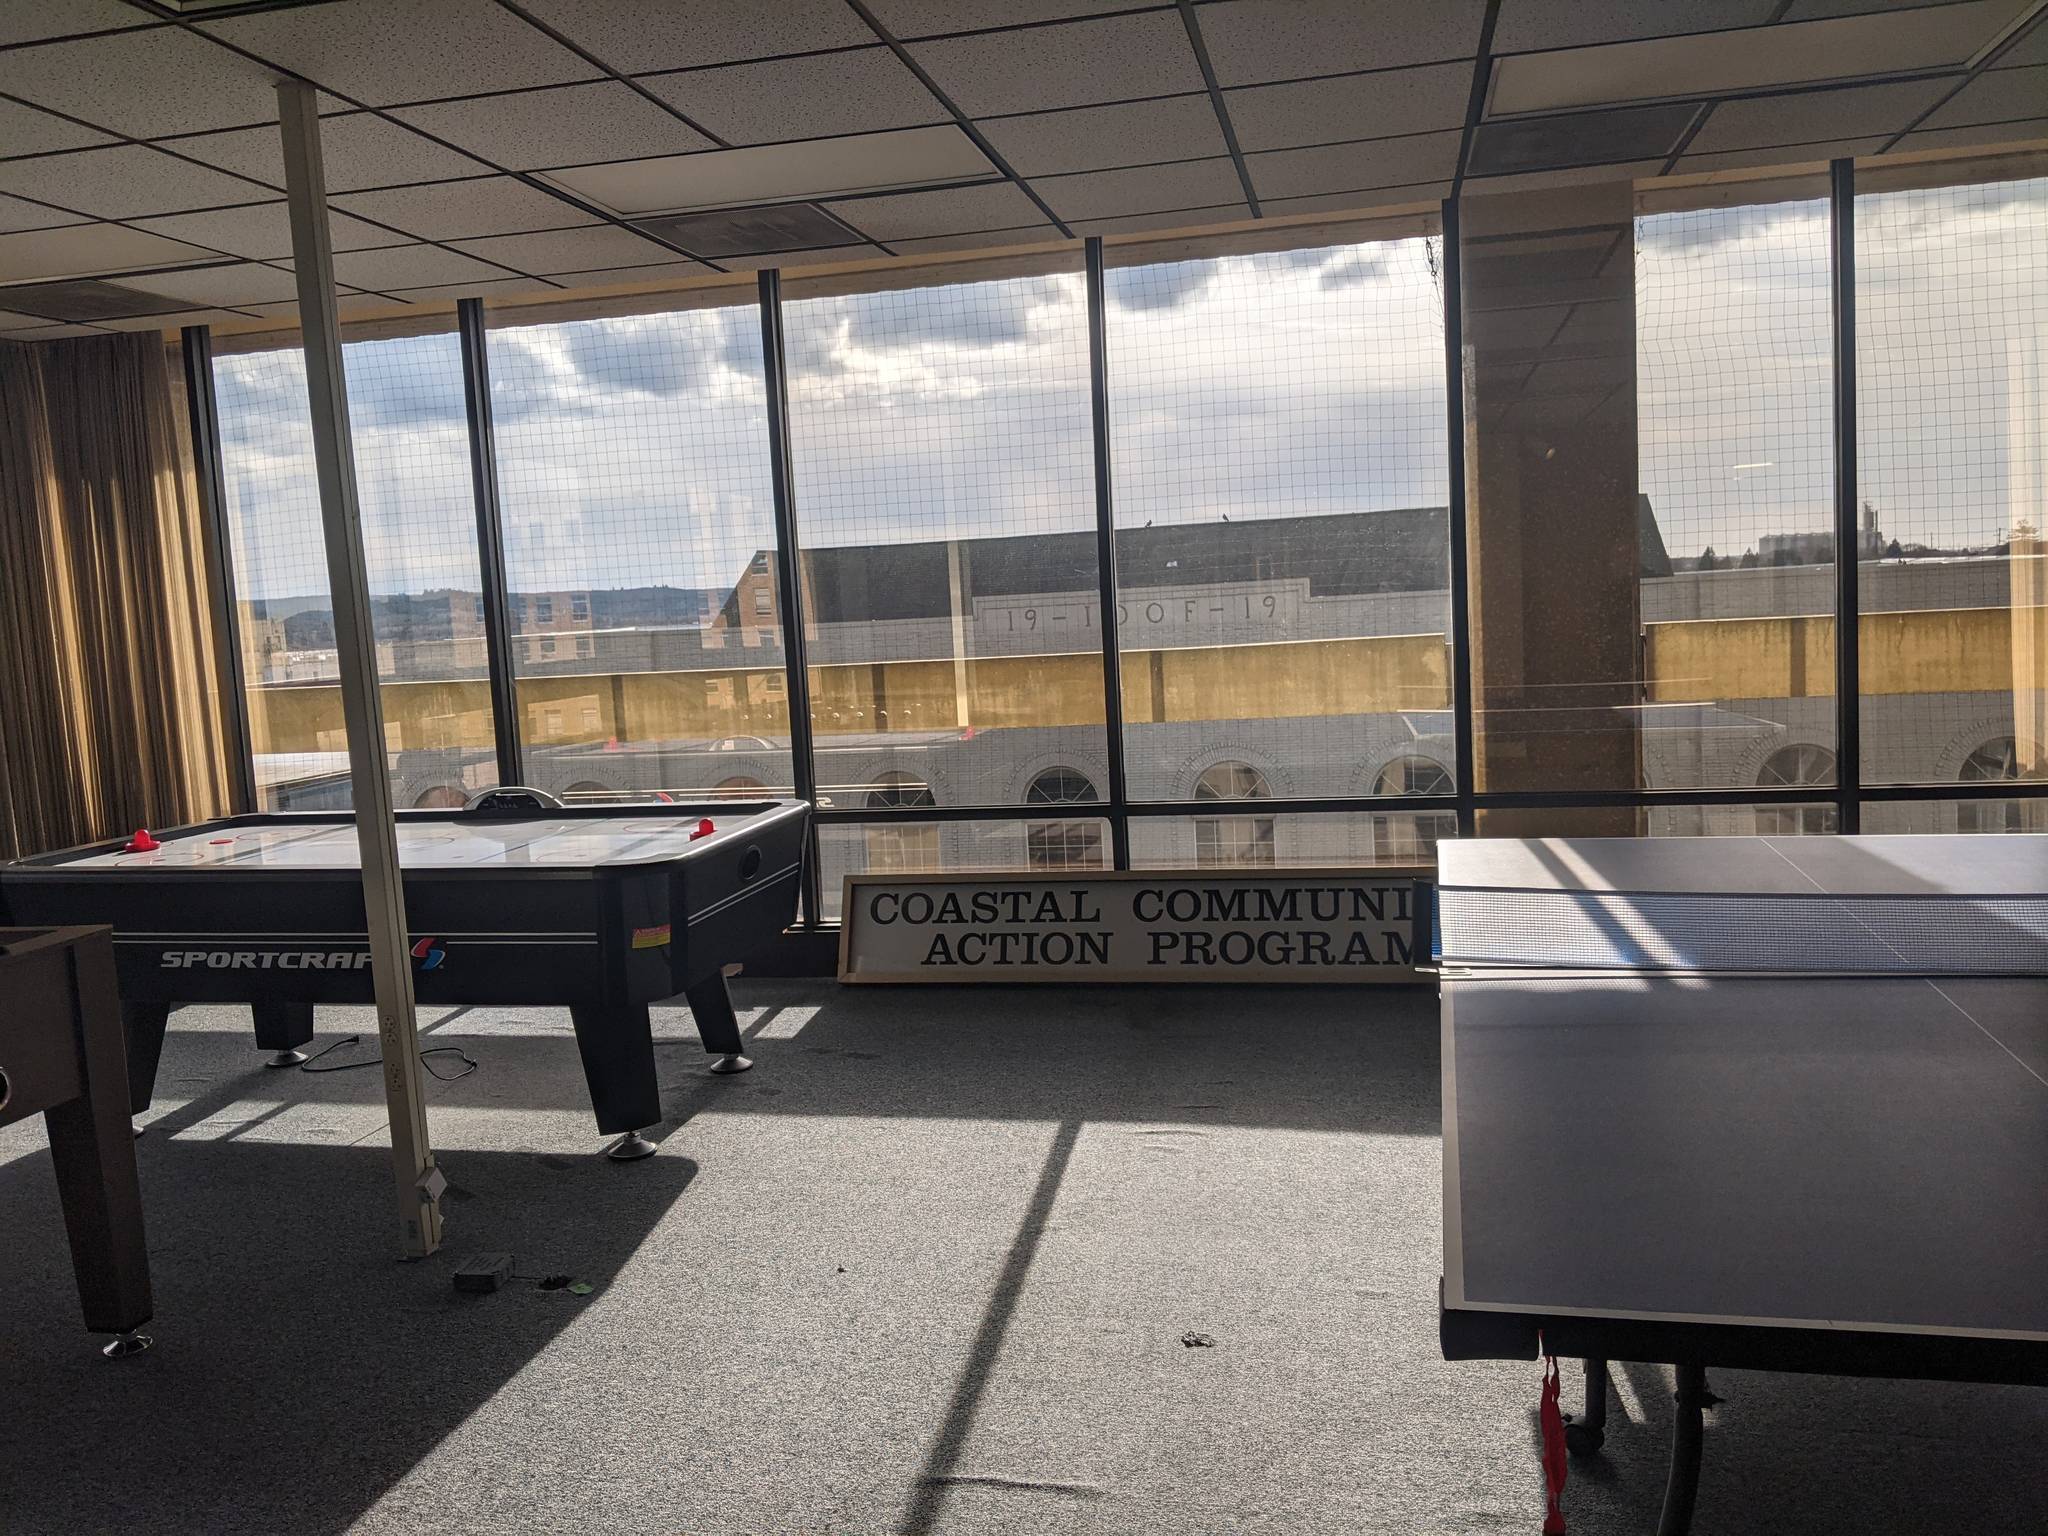 A break room for CCAP employees features table tennis and air hockey with a spectacular view of downtown Aberdeen.